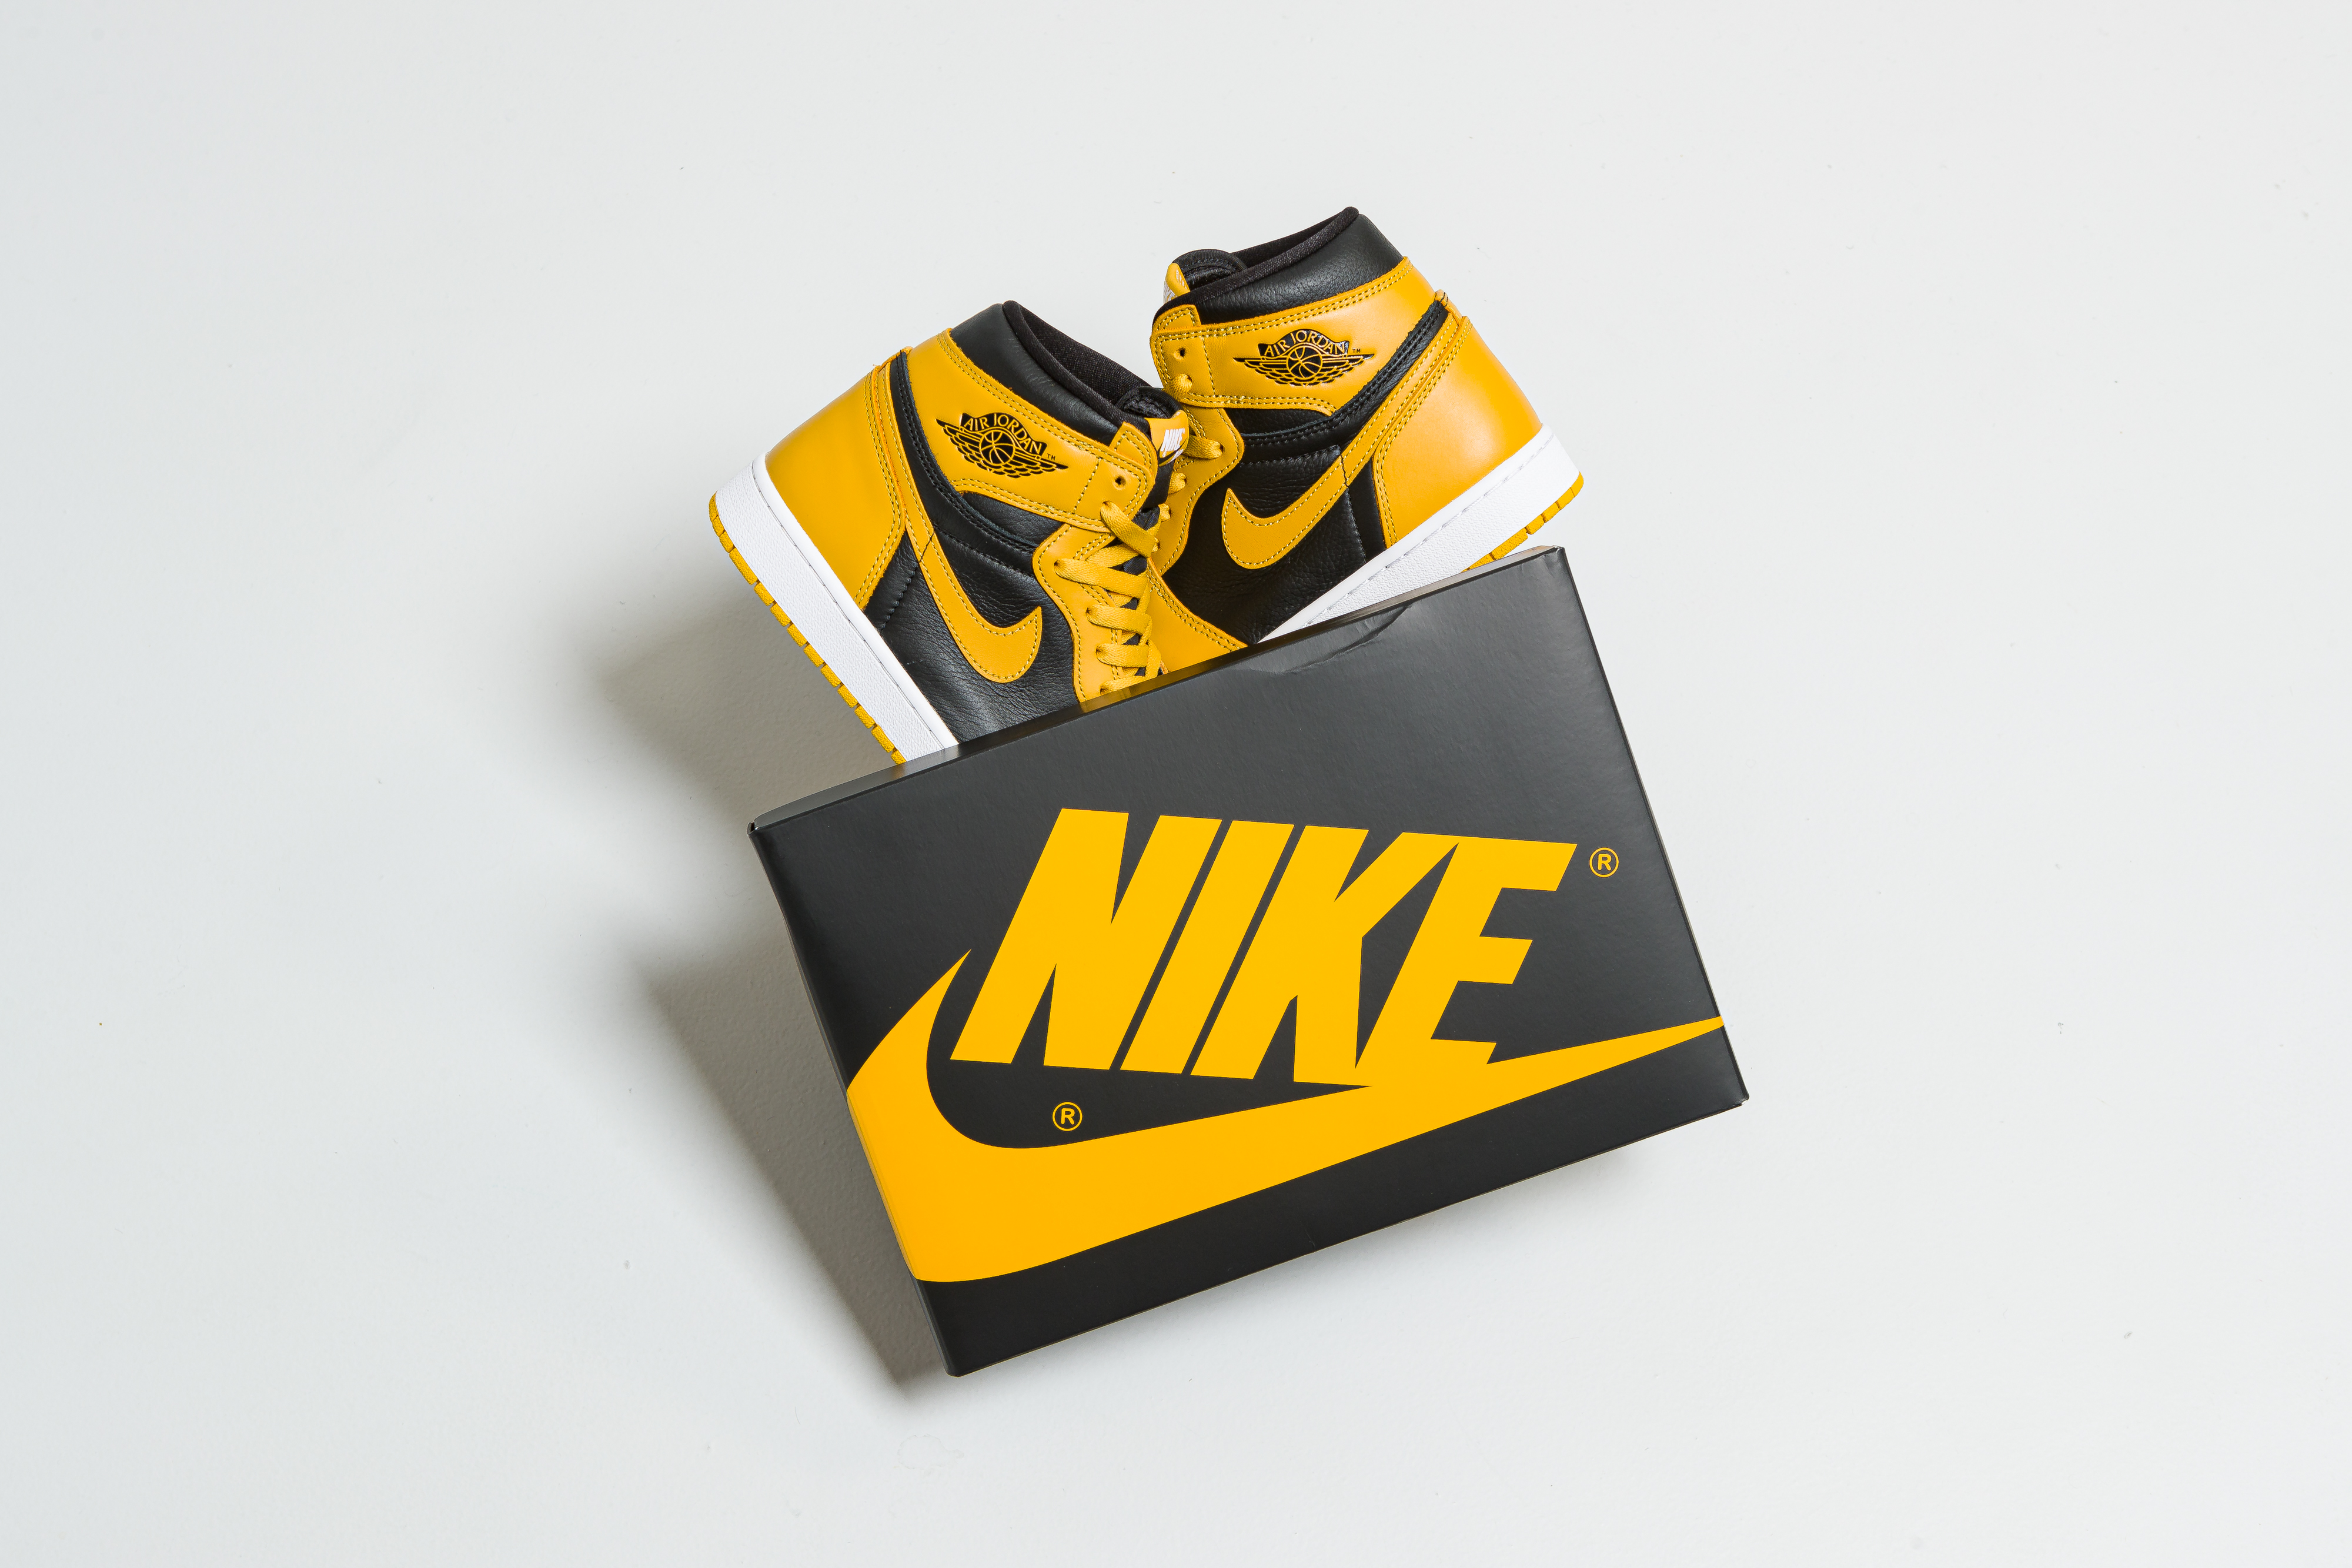 Up There Launches - Nike Air Jordan 1 Retro High OG 'Pollen'